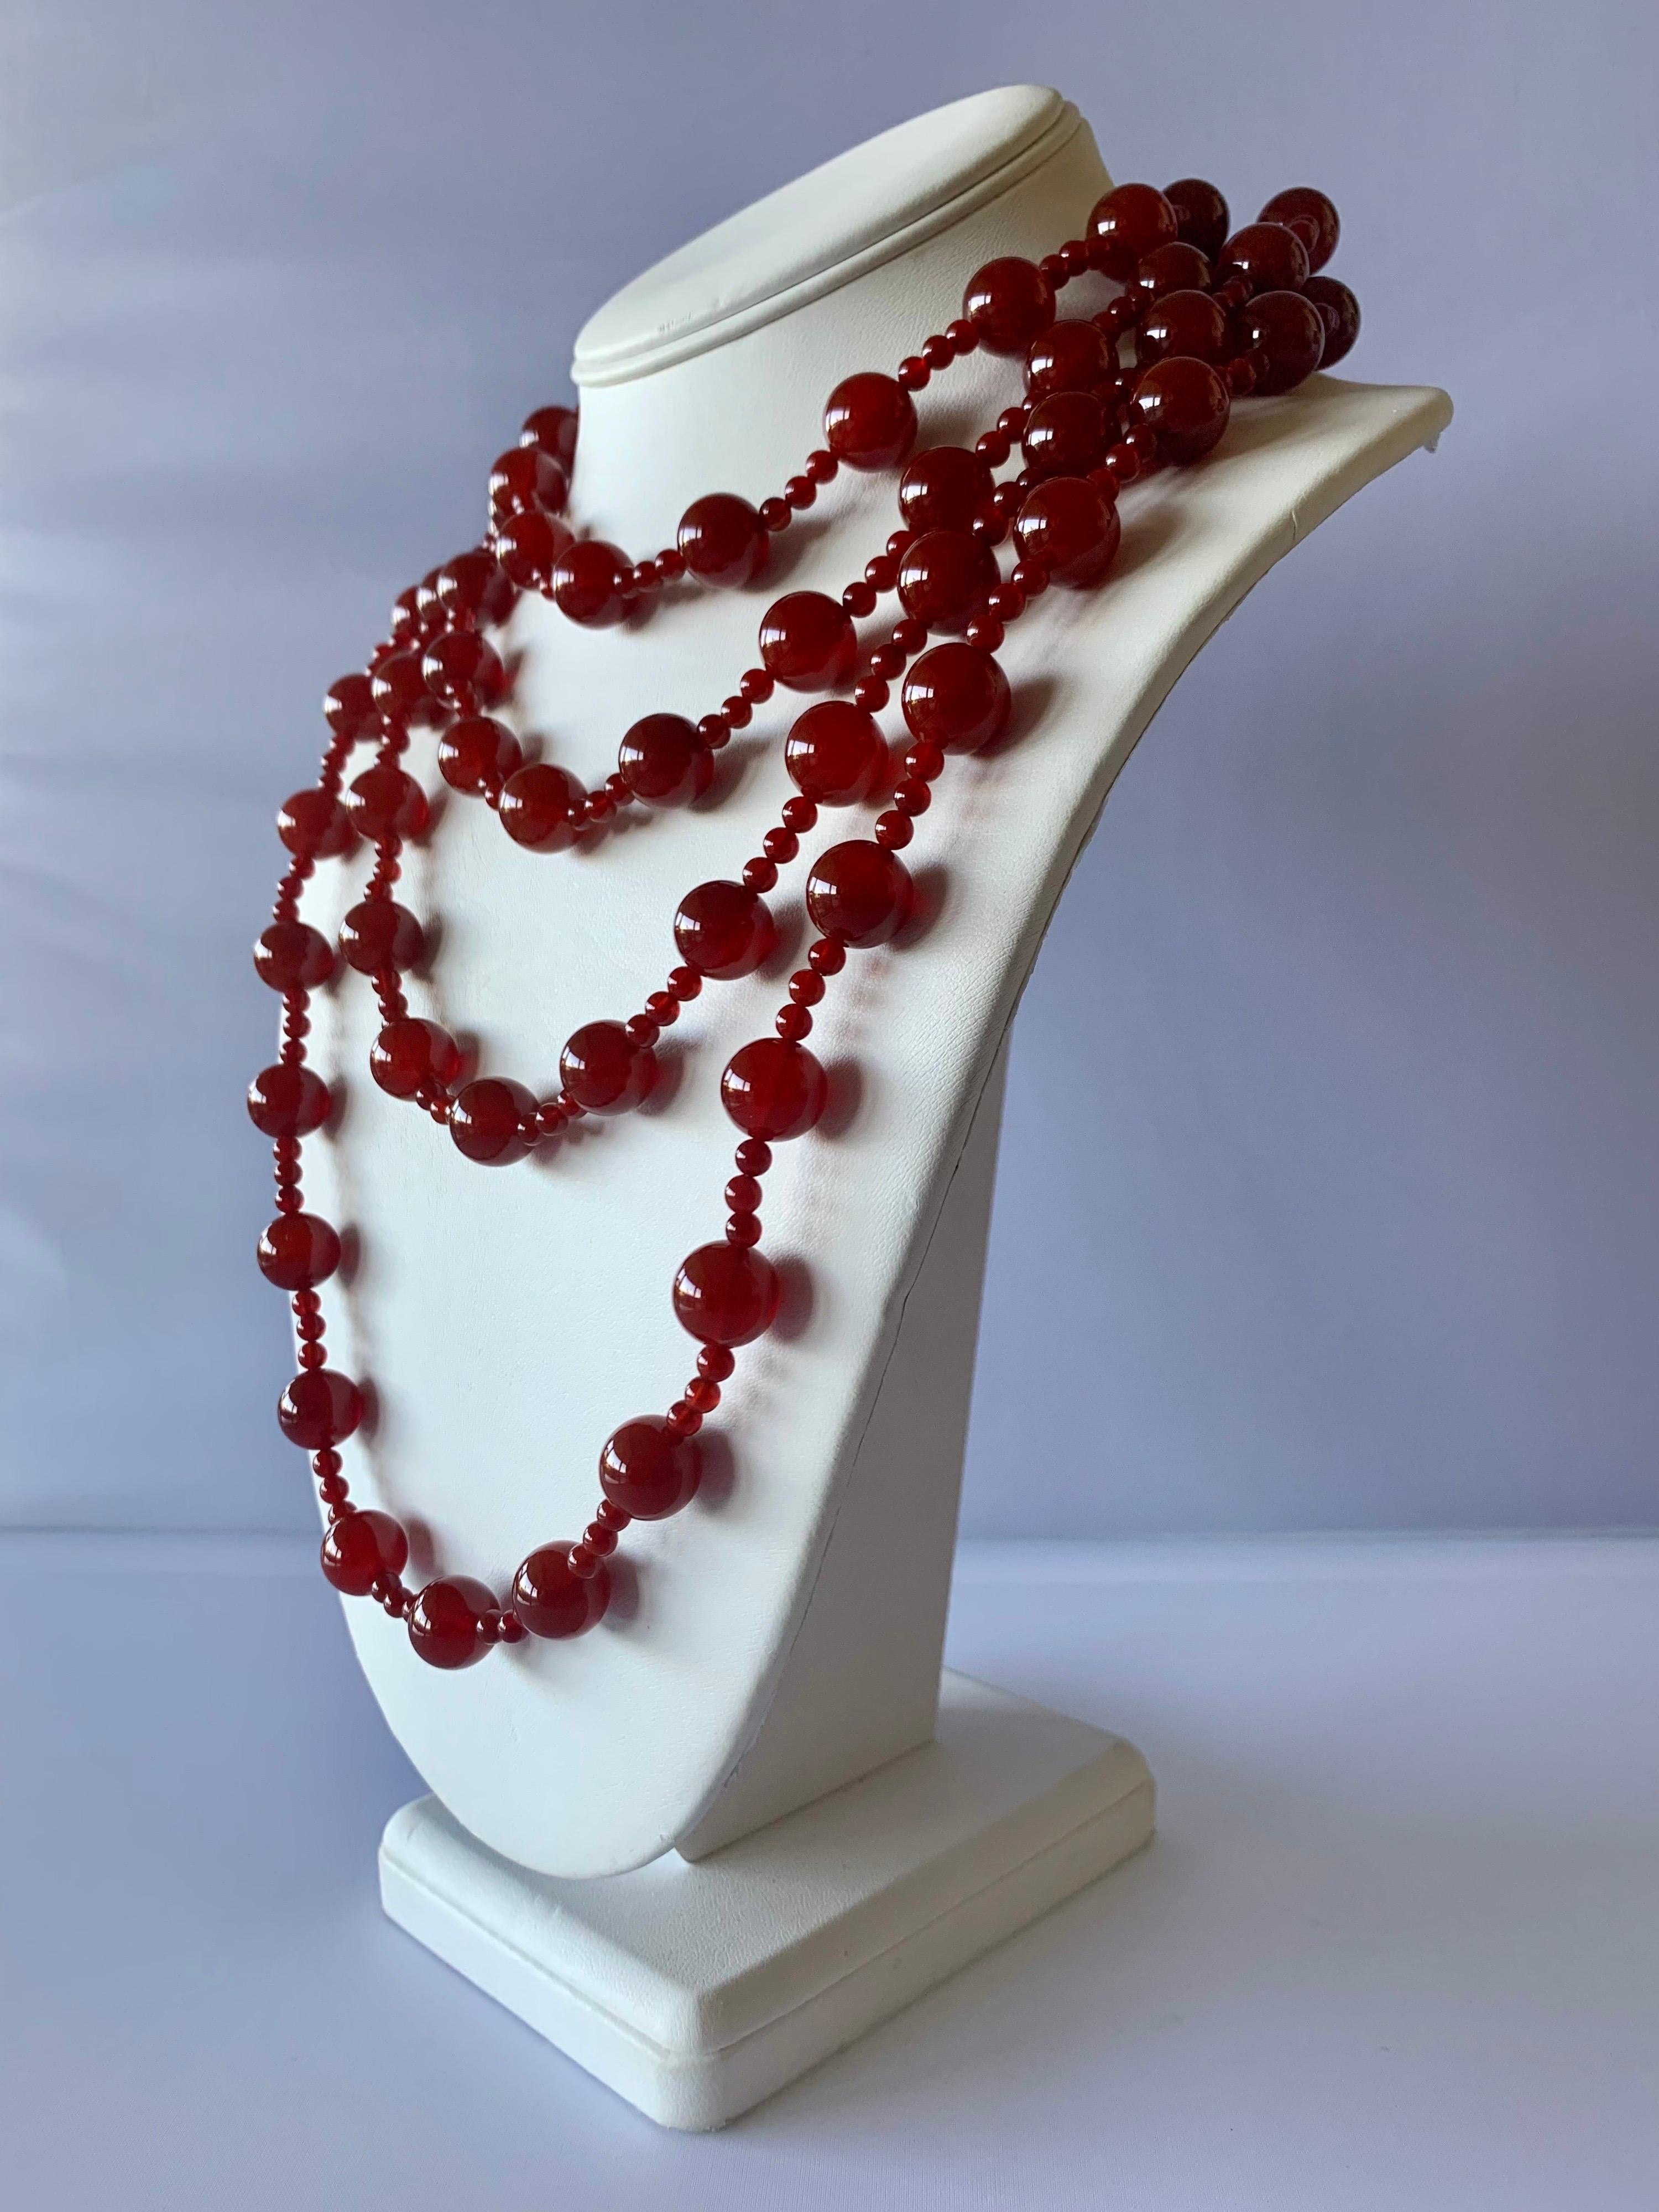 Scarce vintage Chanel beaded necklace - comprised out of large red glass beads by Gripoix, the necklace can be wrapped around the neck up to four times. Signed Chanel.